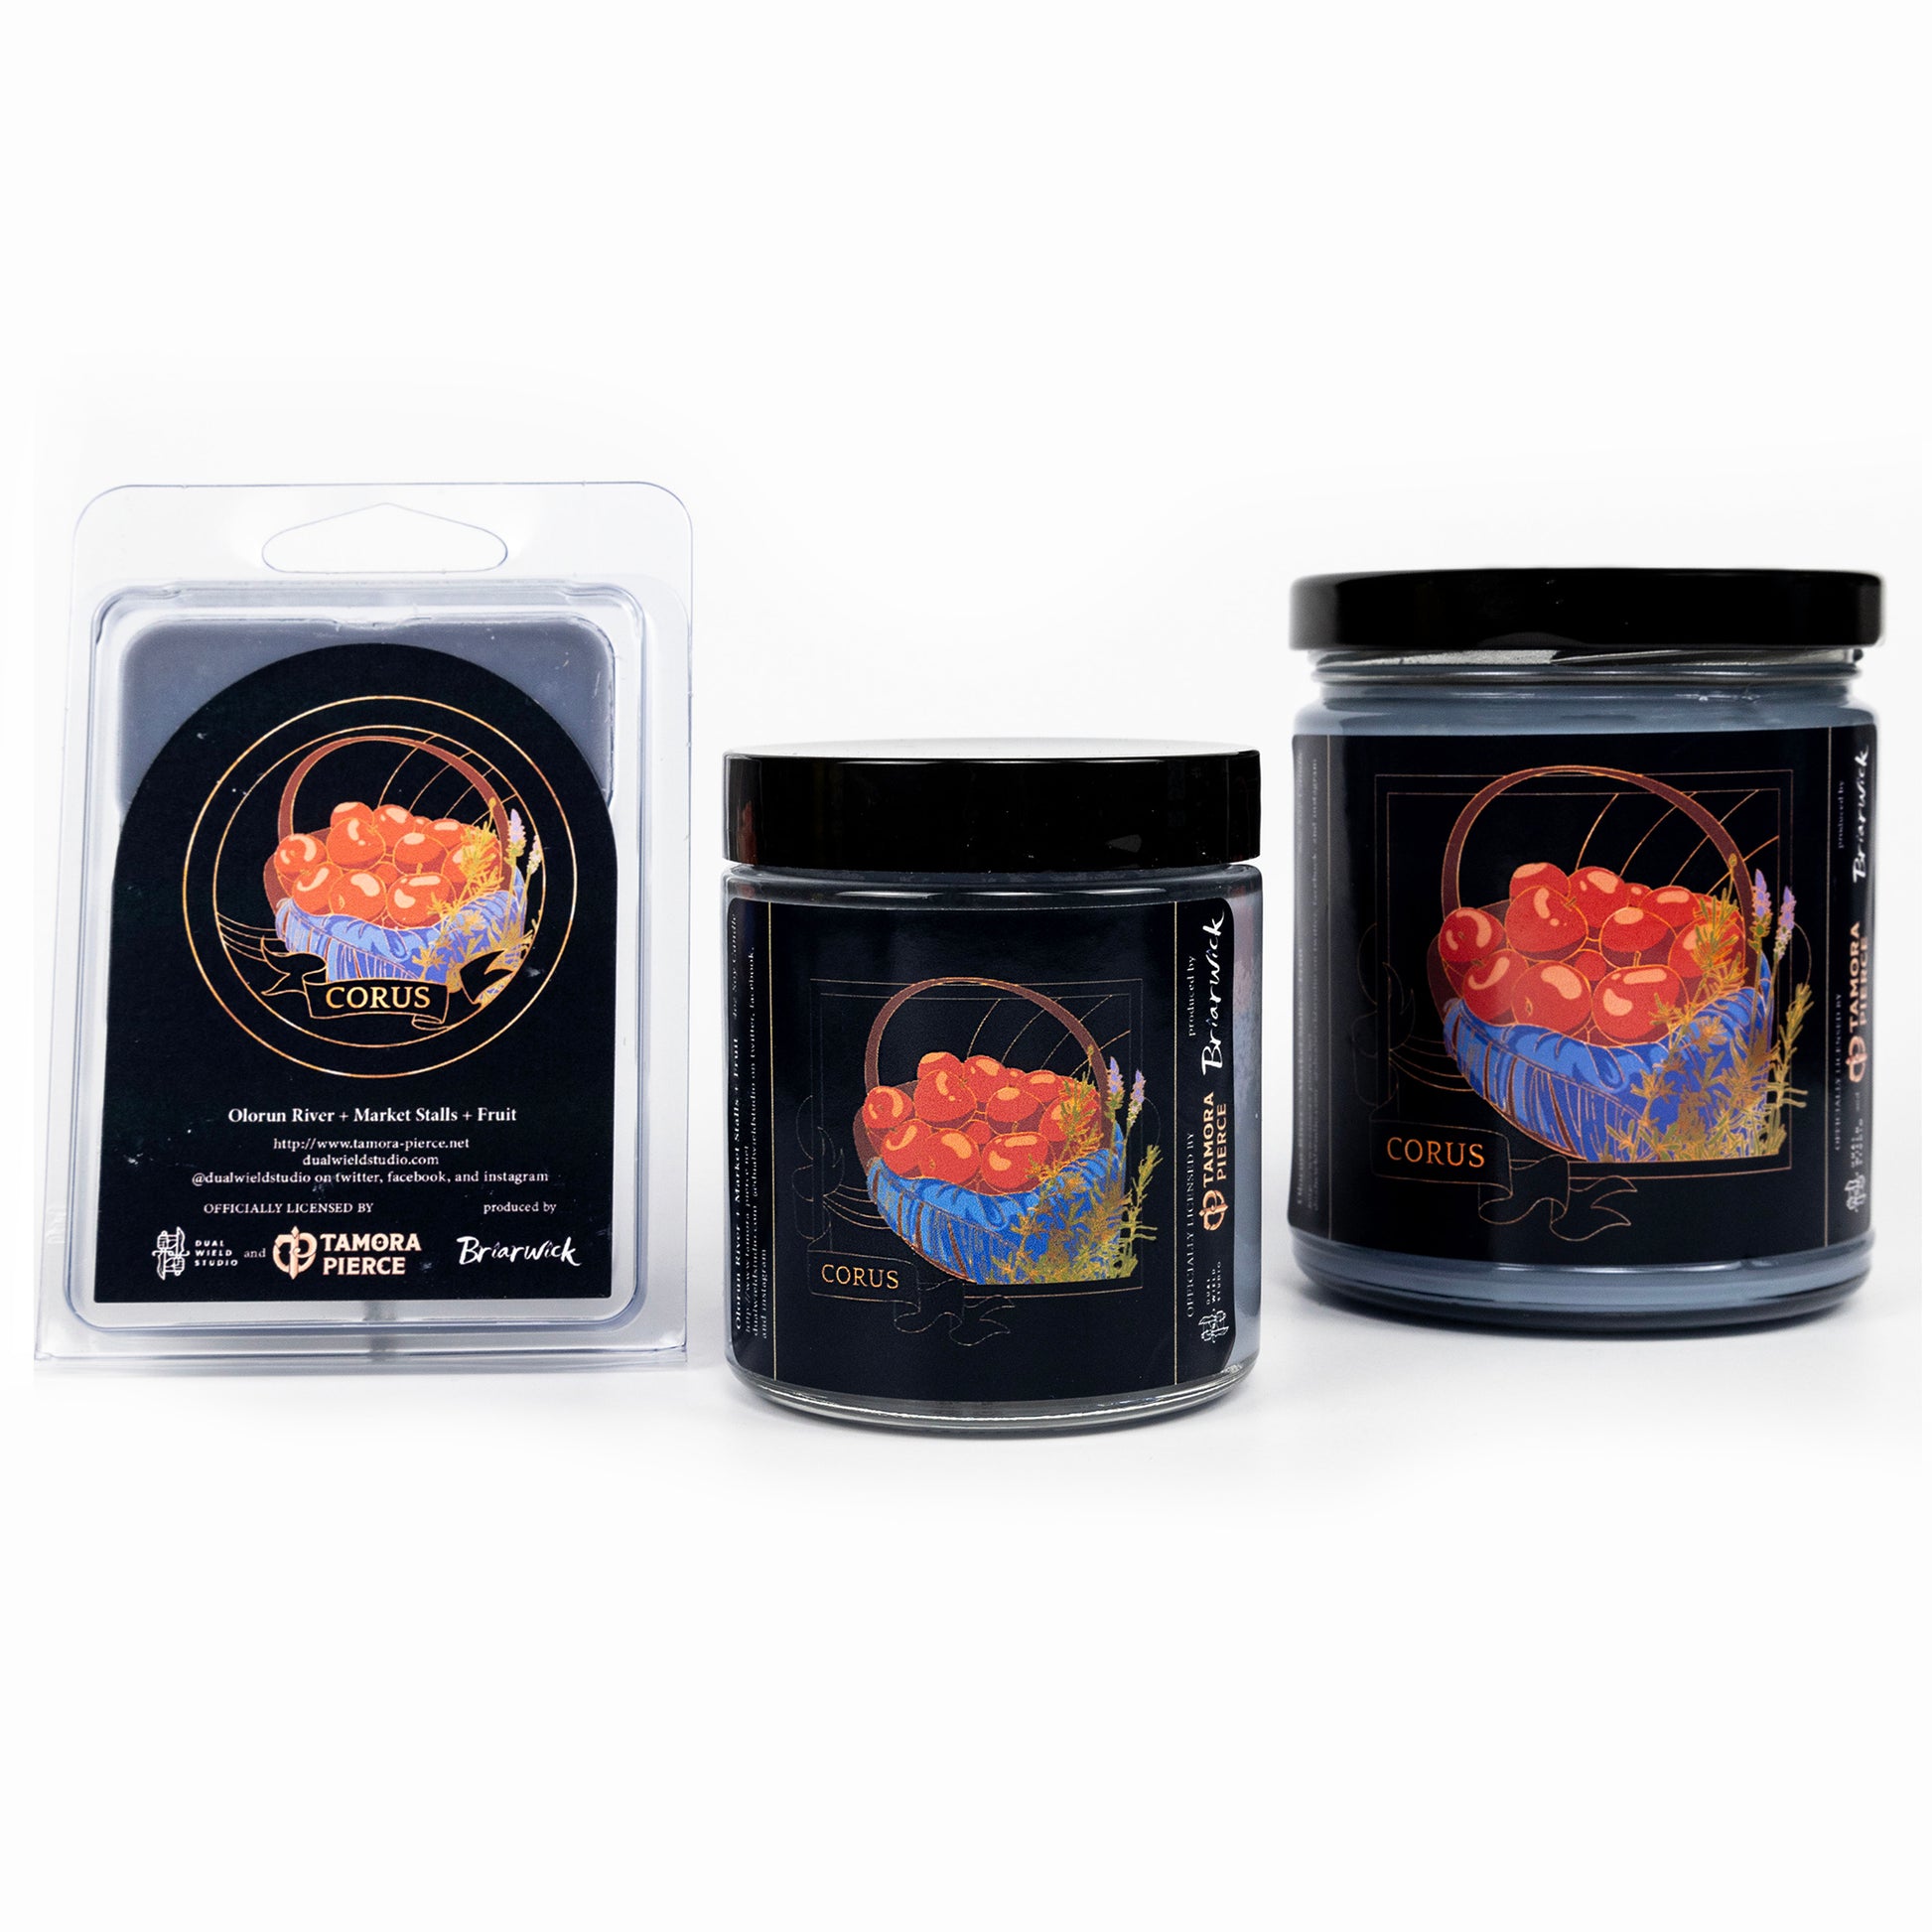 Full set of both Corus candles and wax melts, all with steel grey wax. The label illustration shows a basket of red cherries on a blue cloth.